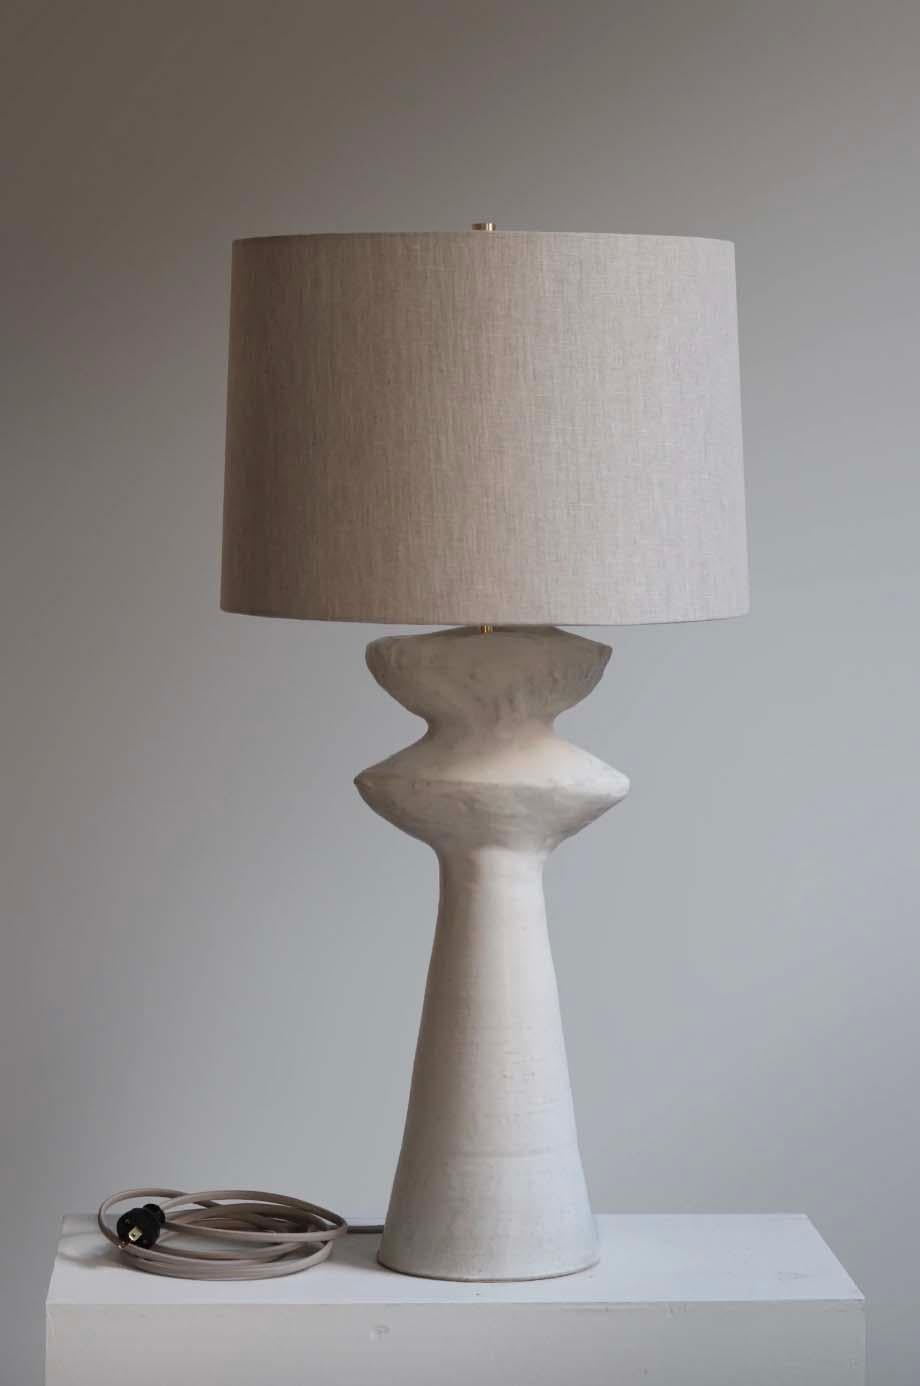 The Cicero lamp is handmade studio pottery by ceramic artist by Danny Kaplan. Shade included. Please note dimensions may vary up to an inch.

Born in New York City and raised in Aix-en-Provence, France, Danny Kaplan’s passion for ceramics was